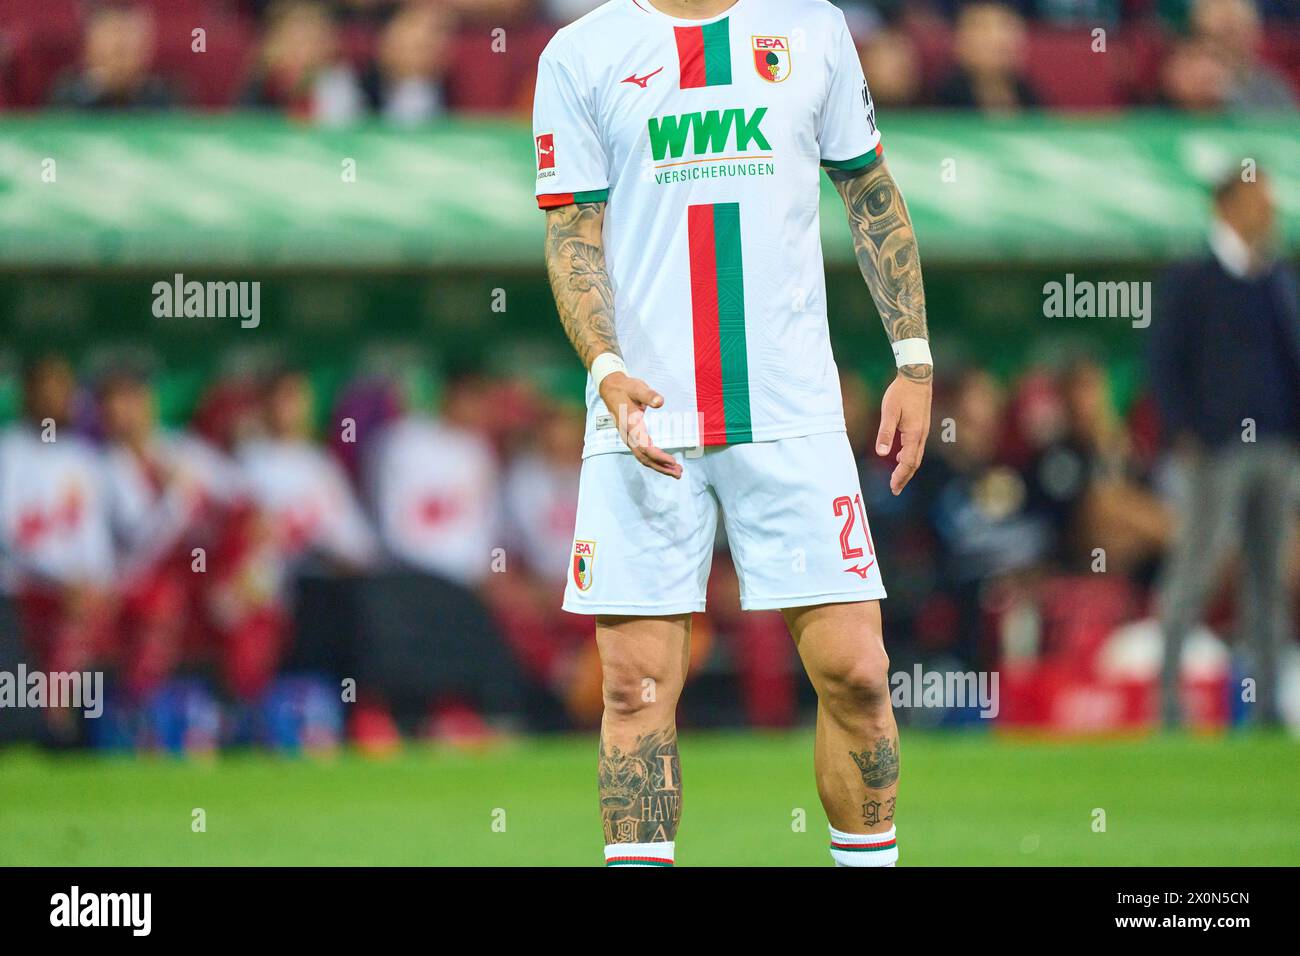 Philip Tietz, FCA 21  in the match FC AUGSBURG - 1. FC Union Berlin 2-0  on Apr 12, 2024 in Augsburg, Germany. Season 2023/2024, 1.Bundesliga, FCA, matchday 29, 29.Spieltag Photographer: ddp images / star-images    - DFL REGULATIONS PROHIBIT ANY USE OF PHOTOGRAPHS as IMAGE SEQUENCES and/or QUASI-VIDEO - Stock Photo